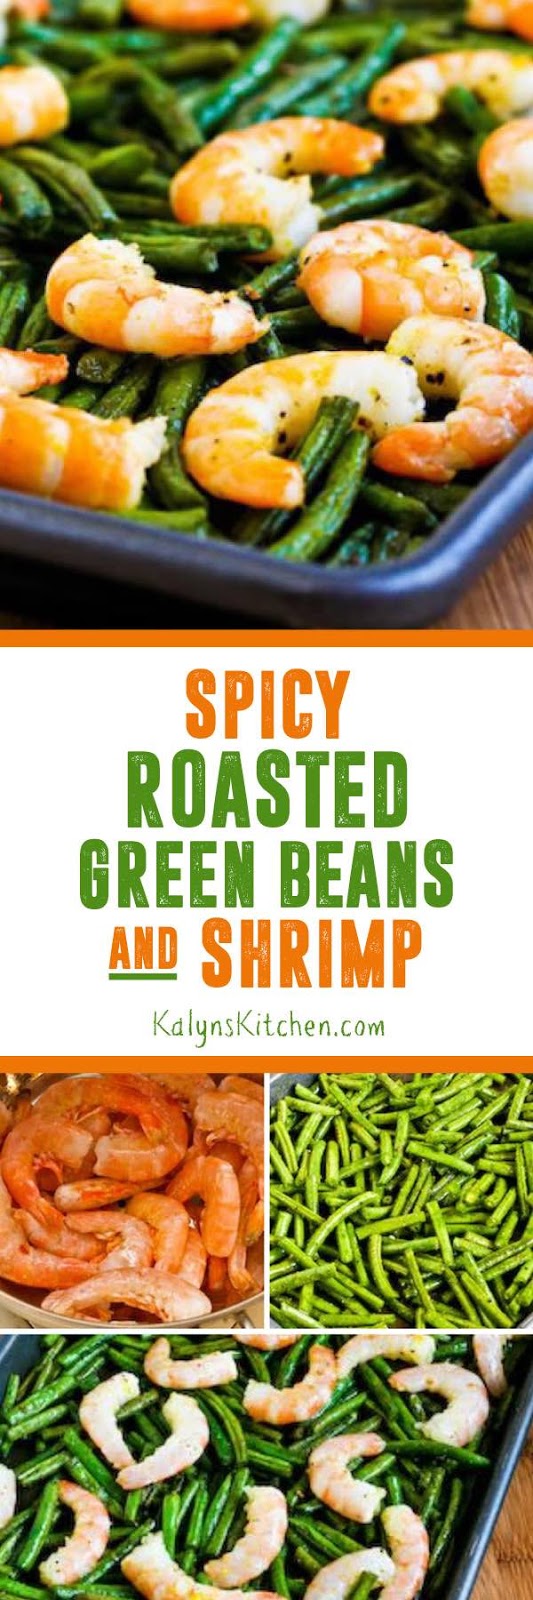 Spicy Roasted Green Beans (or Broccoli) and Shrimp Sheet Pan Meal ...